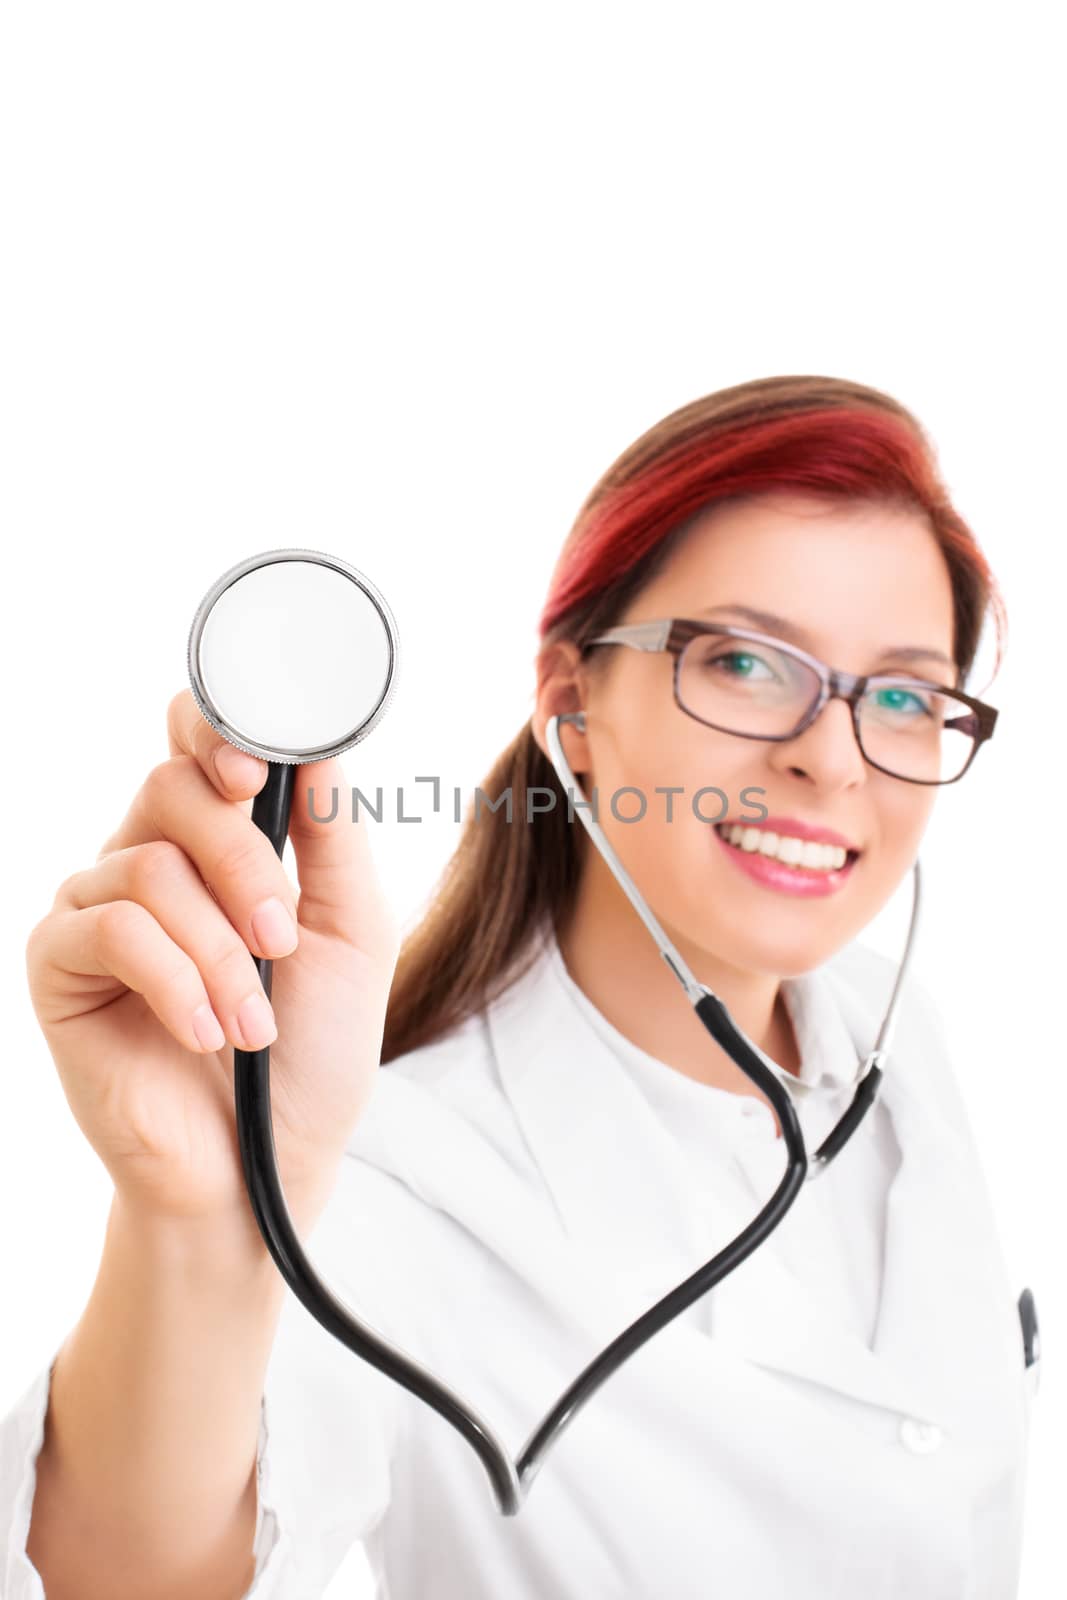 Portrait of a smiling young female health care professional or doctor or nurse with glasses holding stethoscope pointed toward camera, isolated on white background. Selective focus.